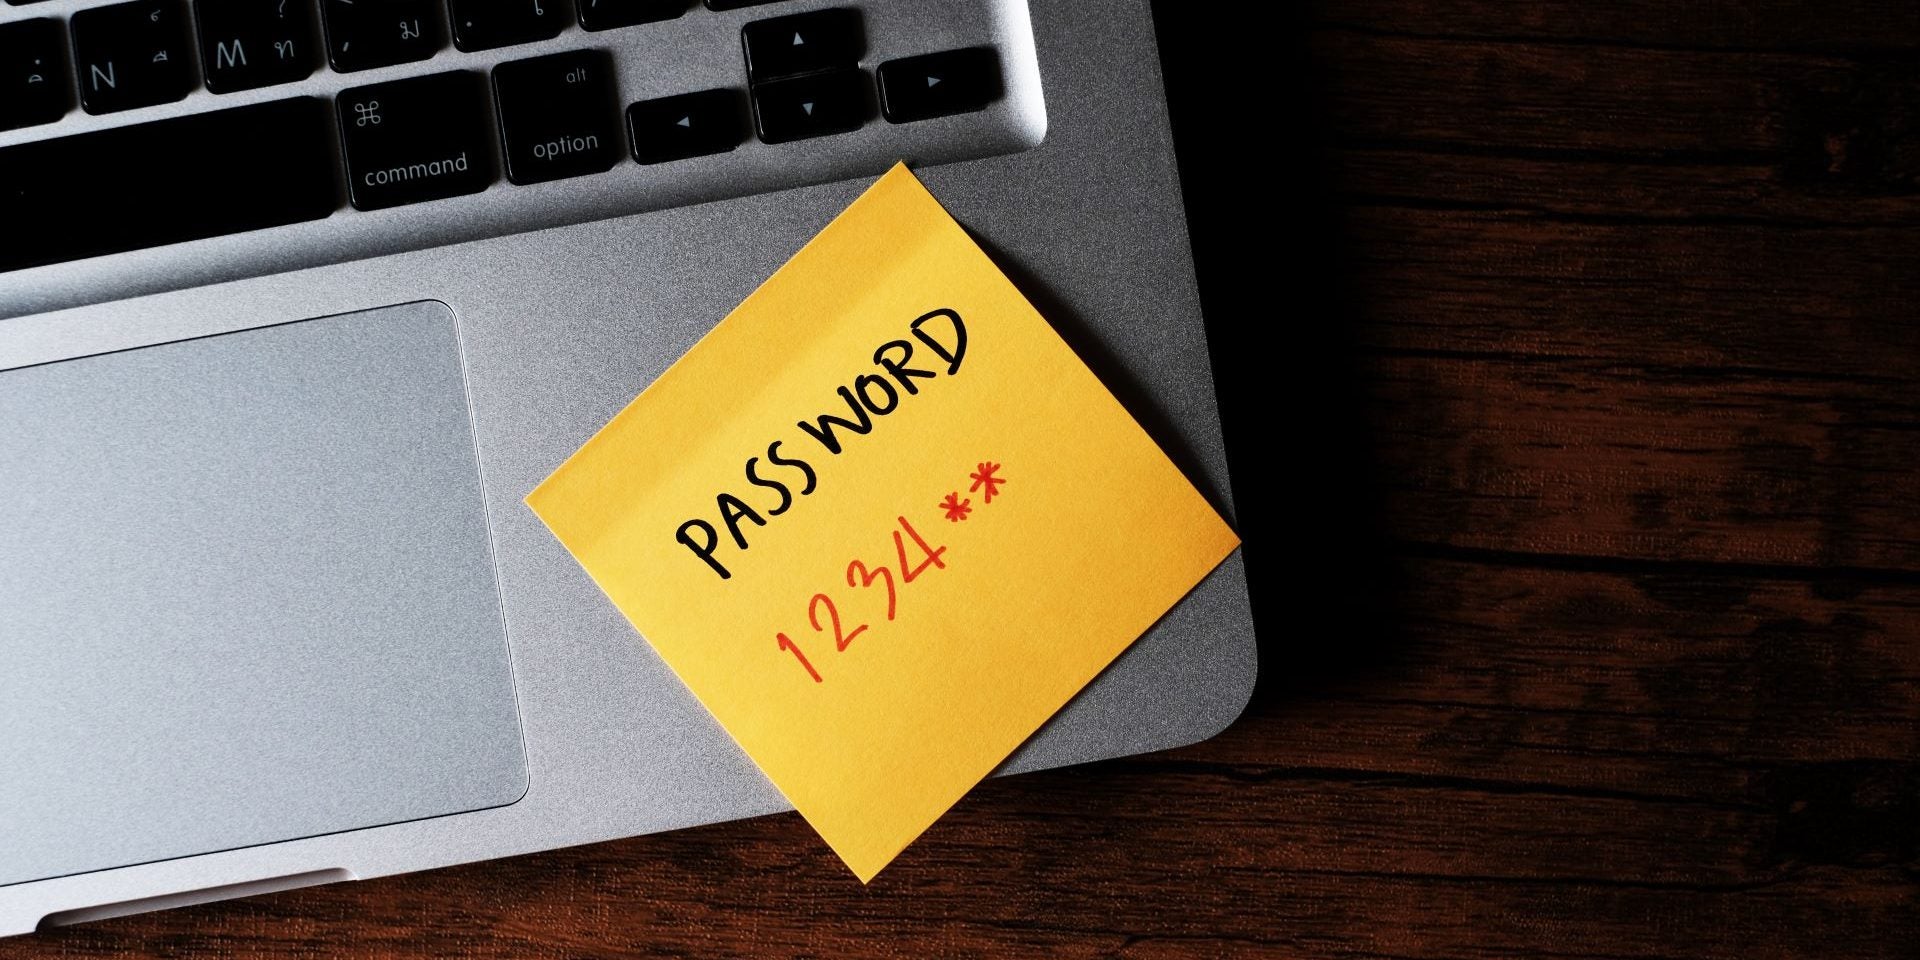 list of the most common passwords